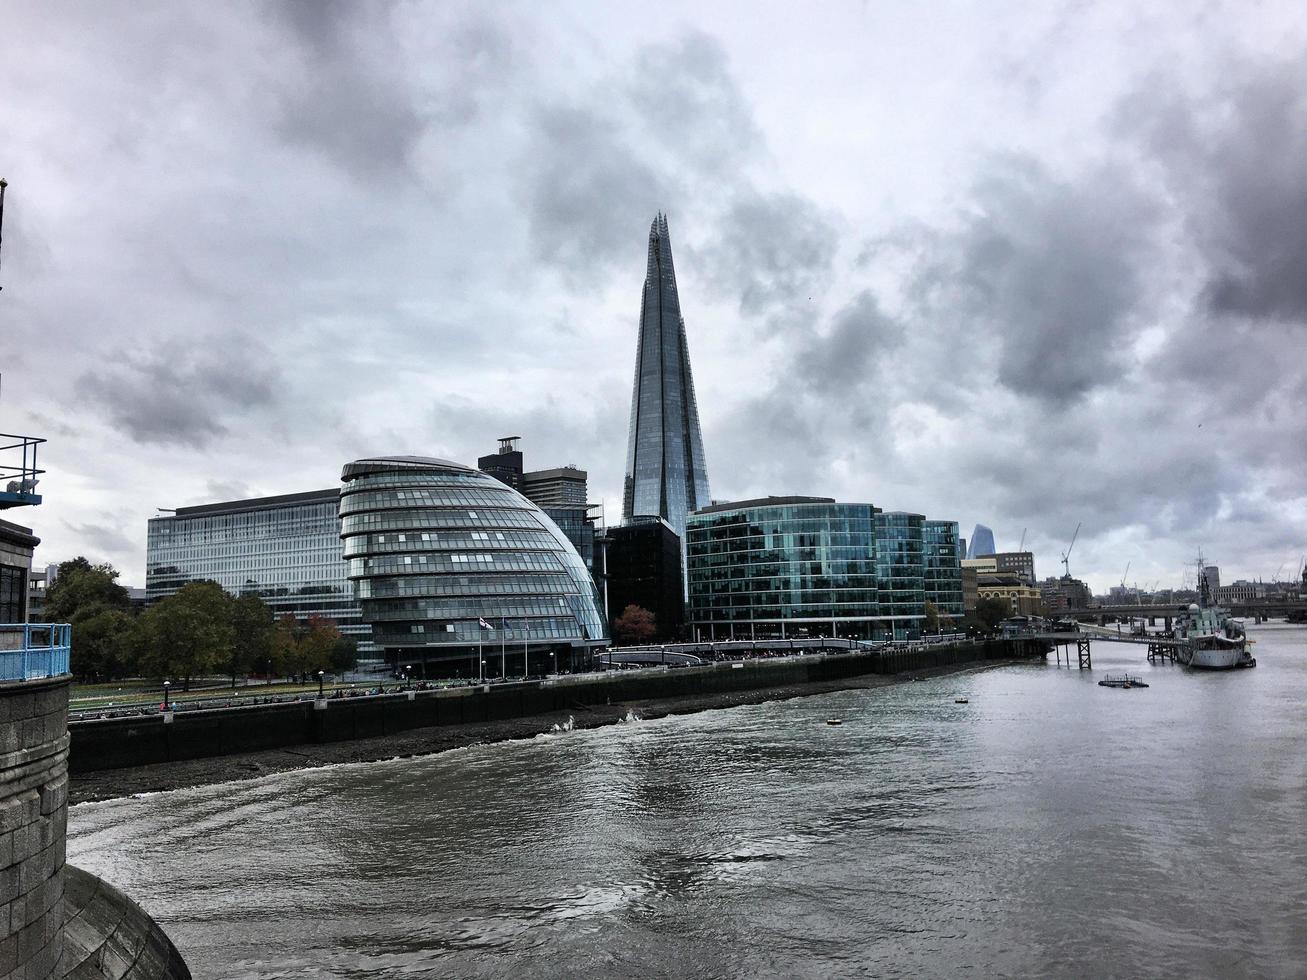 London in the UK in 2019. A view of the River Thames in London photo